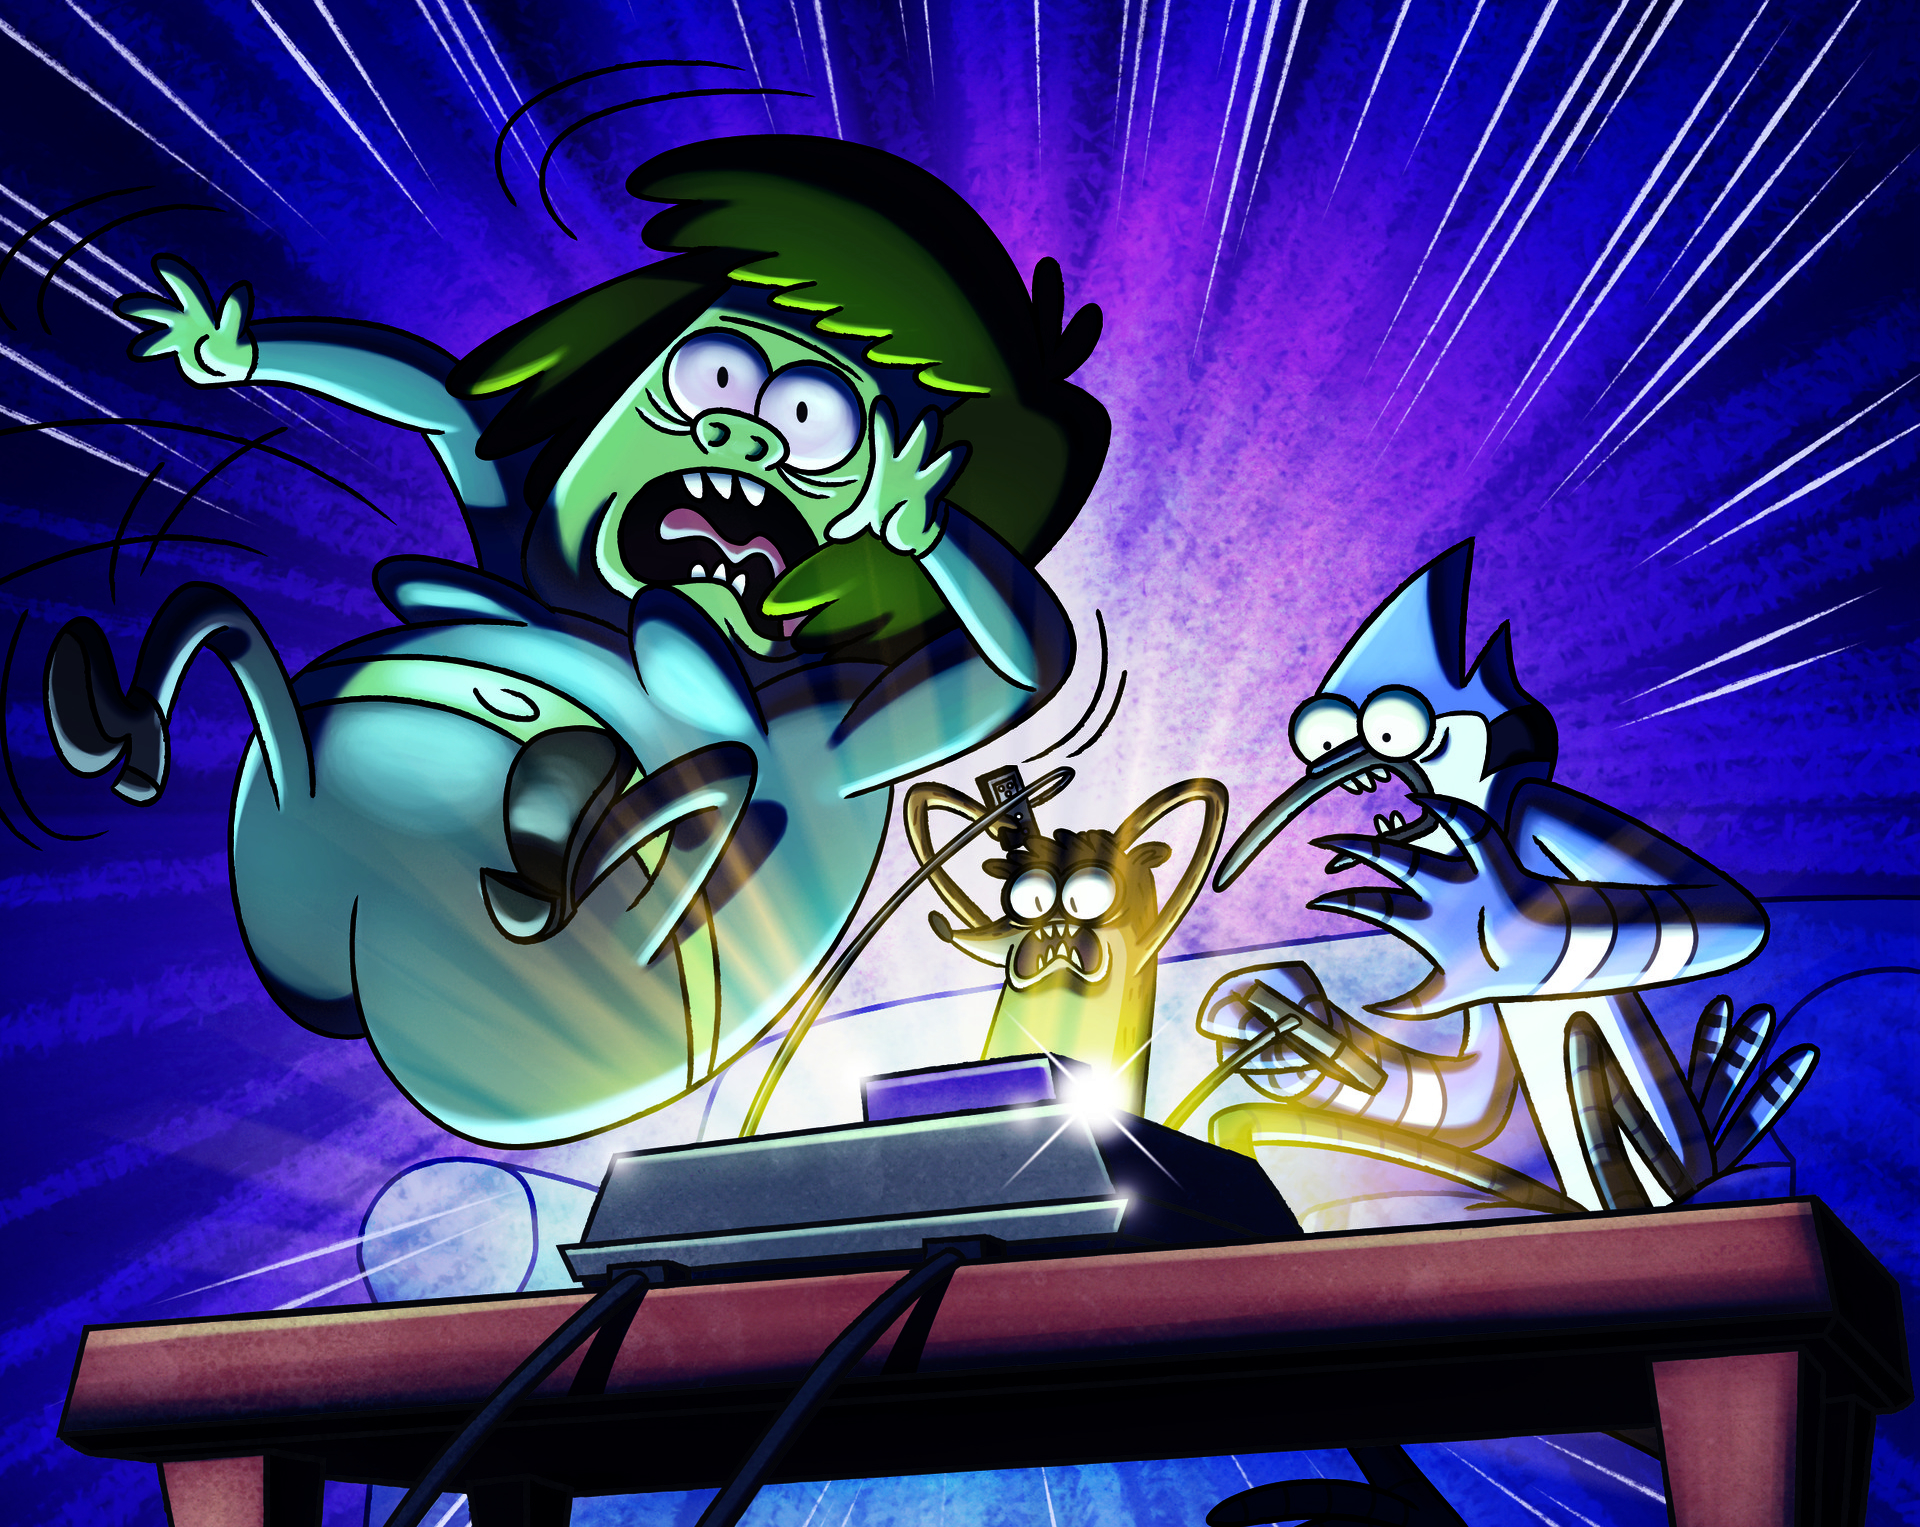 10+ Regular Show HD Wallpapers and Backgrounds